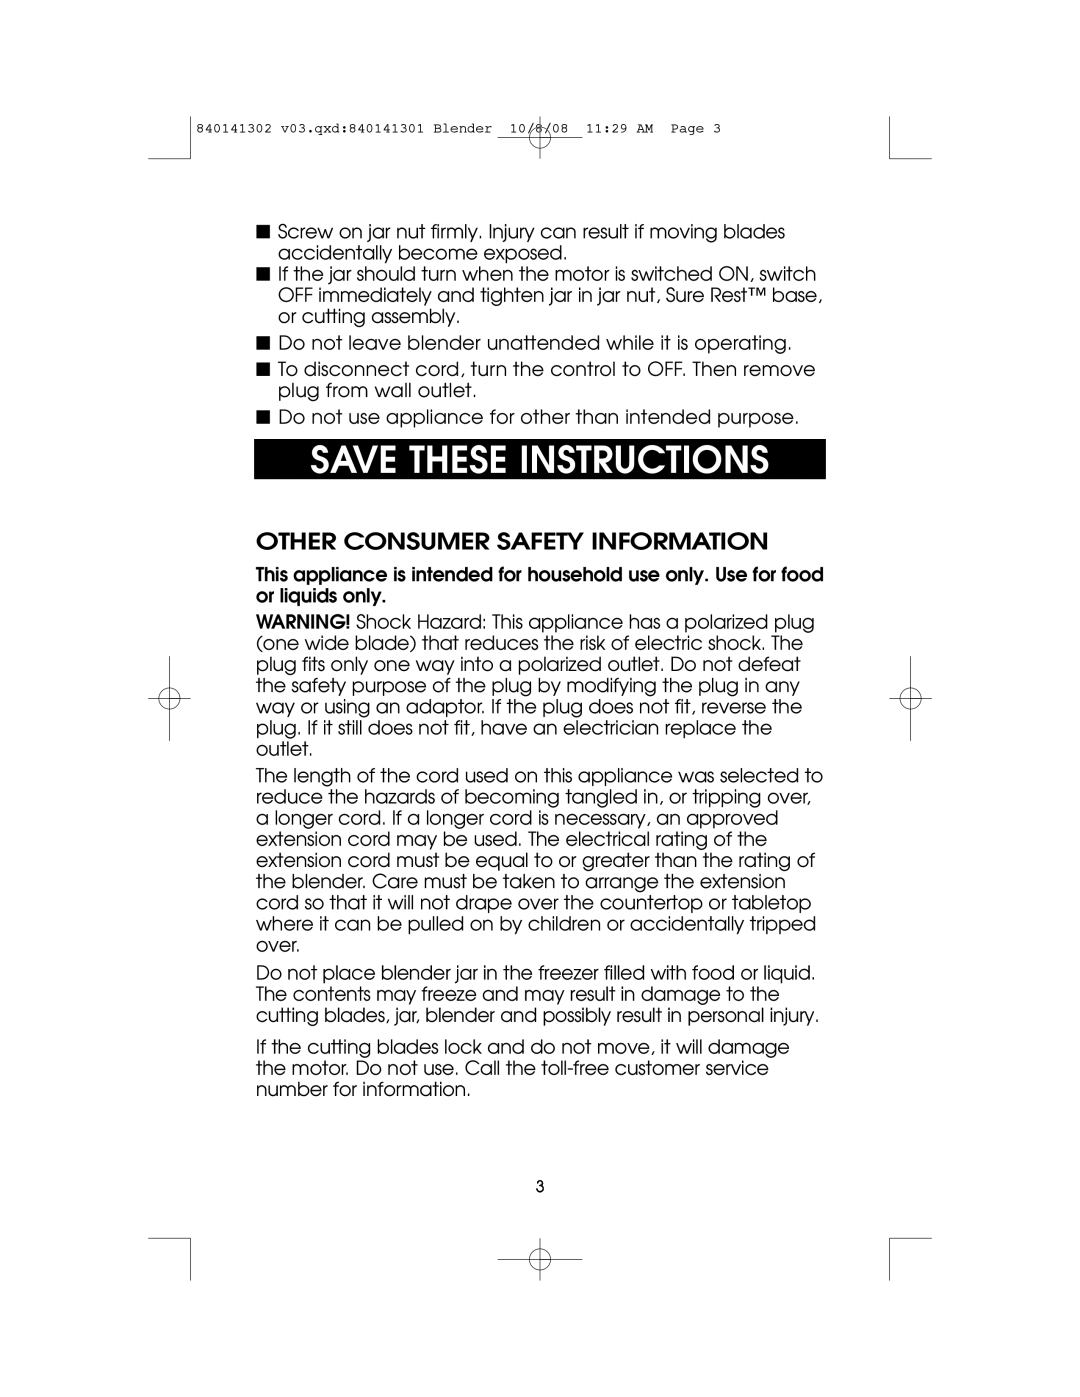 Hamilton Beach 840141302 owner manual Save These Instructions, Other Consumer Safety Information 